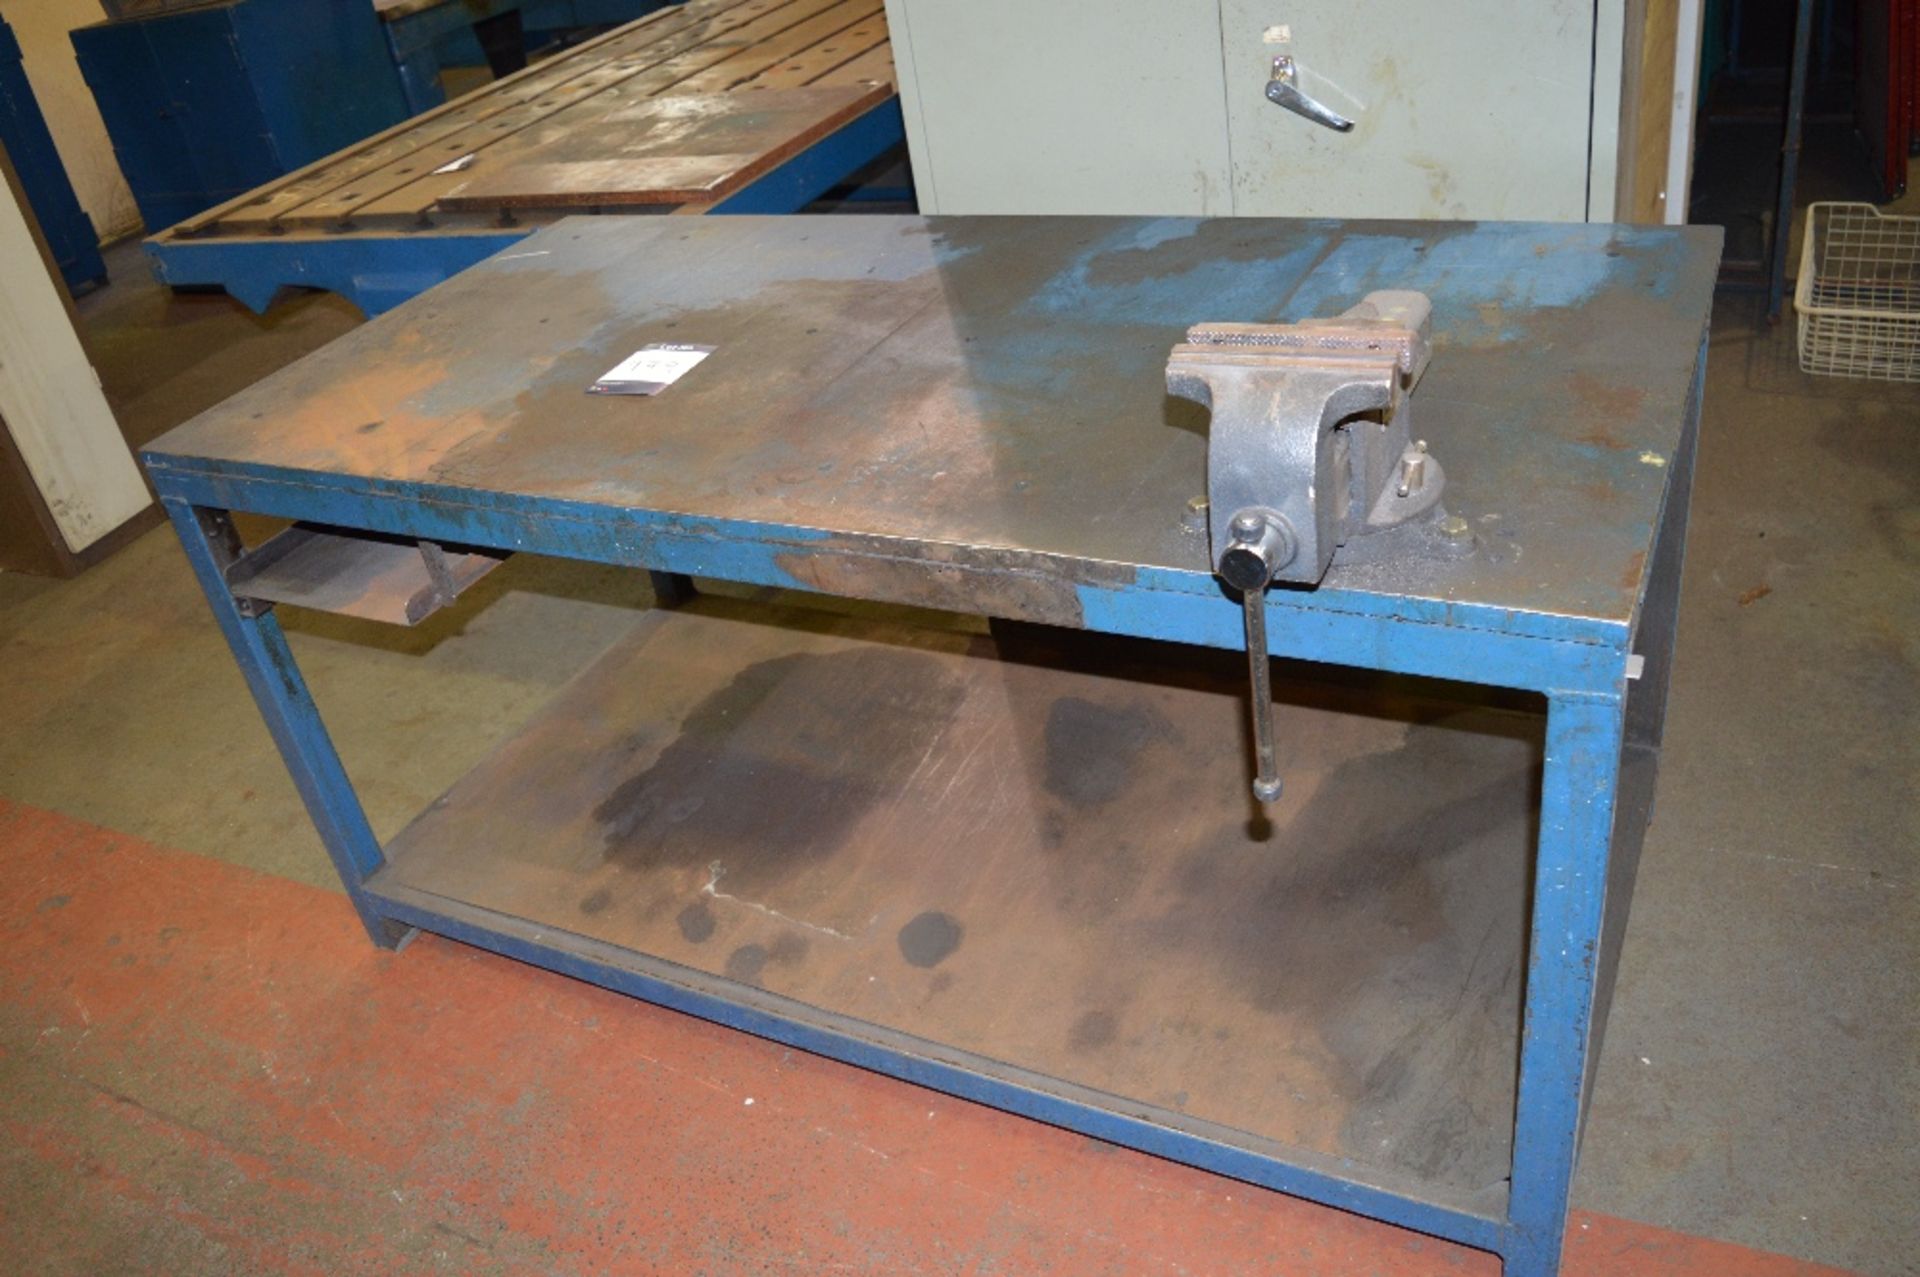 Steel Welding Bench with Stanely 6" Vice
1.60m (w)